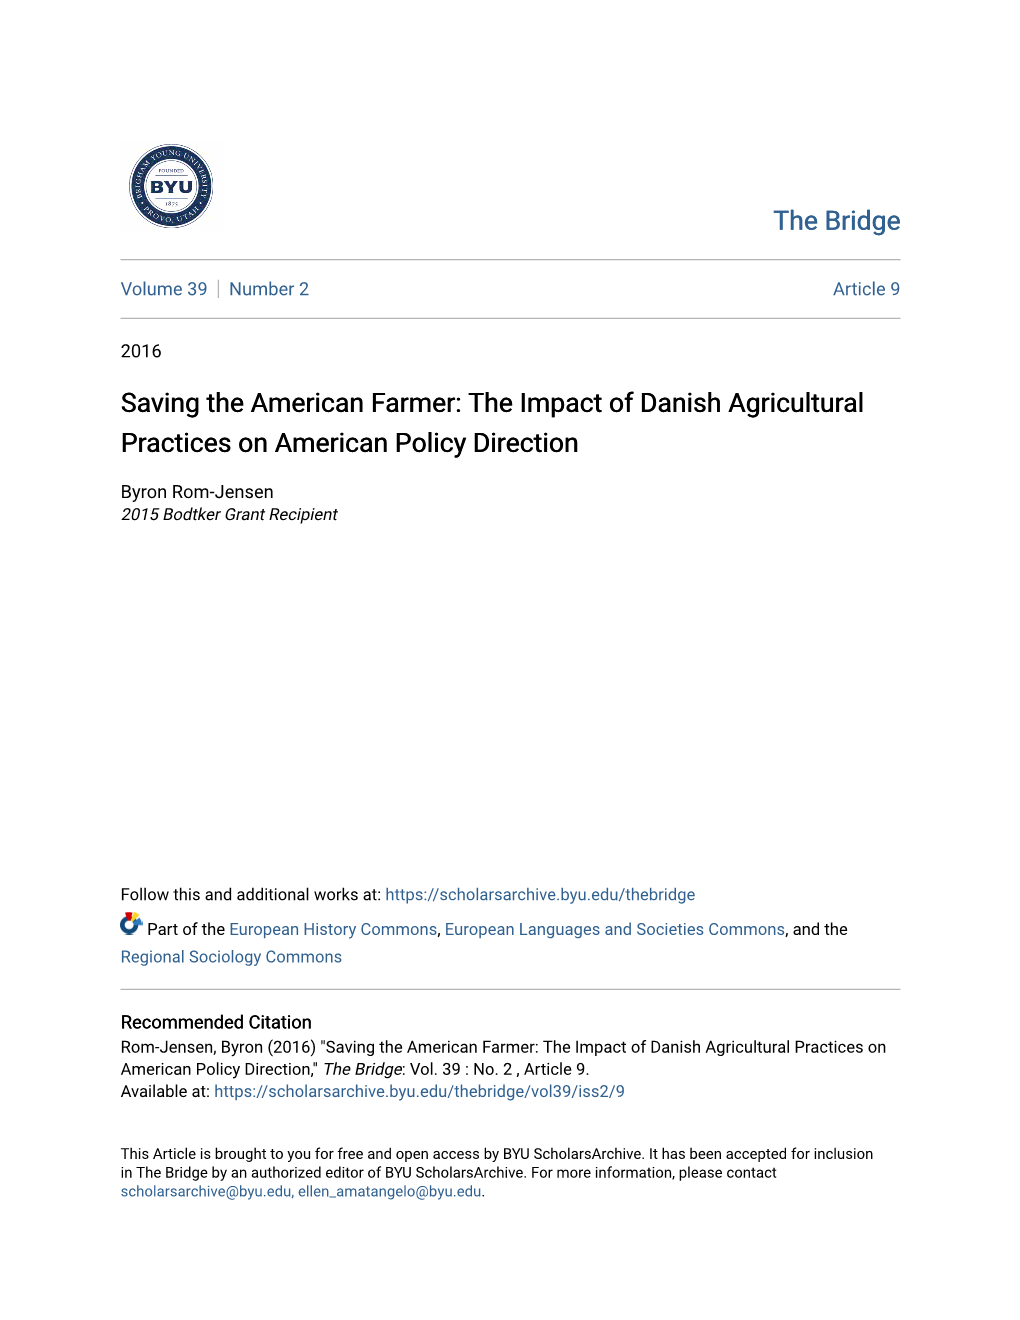 The Impact of Danish Agricultural Practices on American Policy Direction